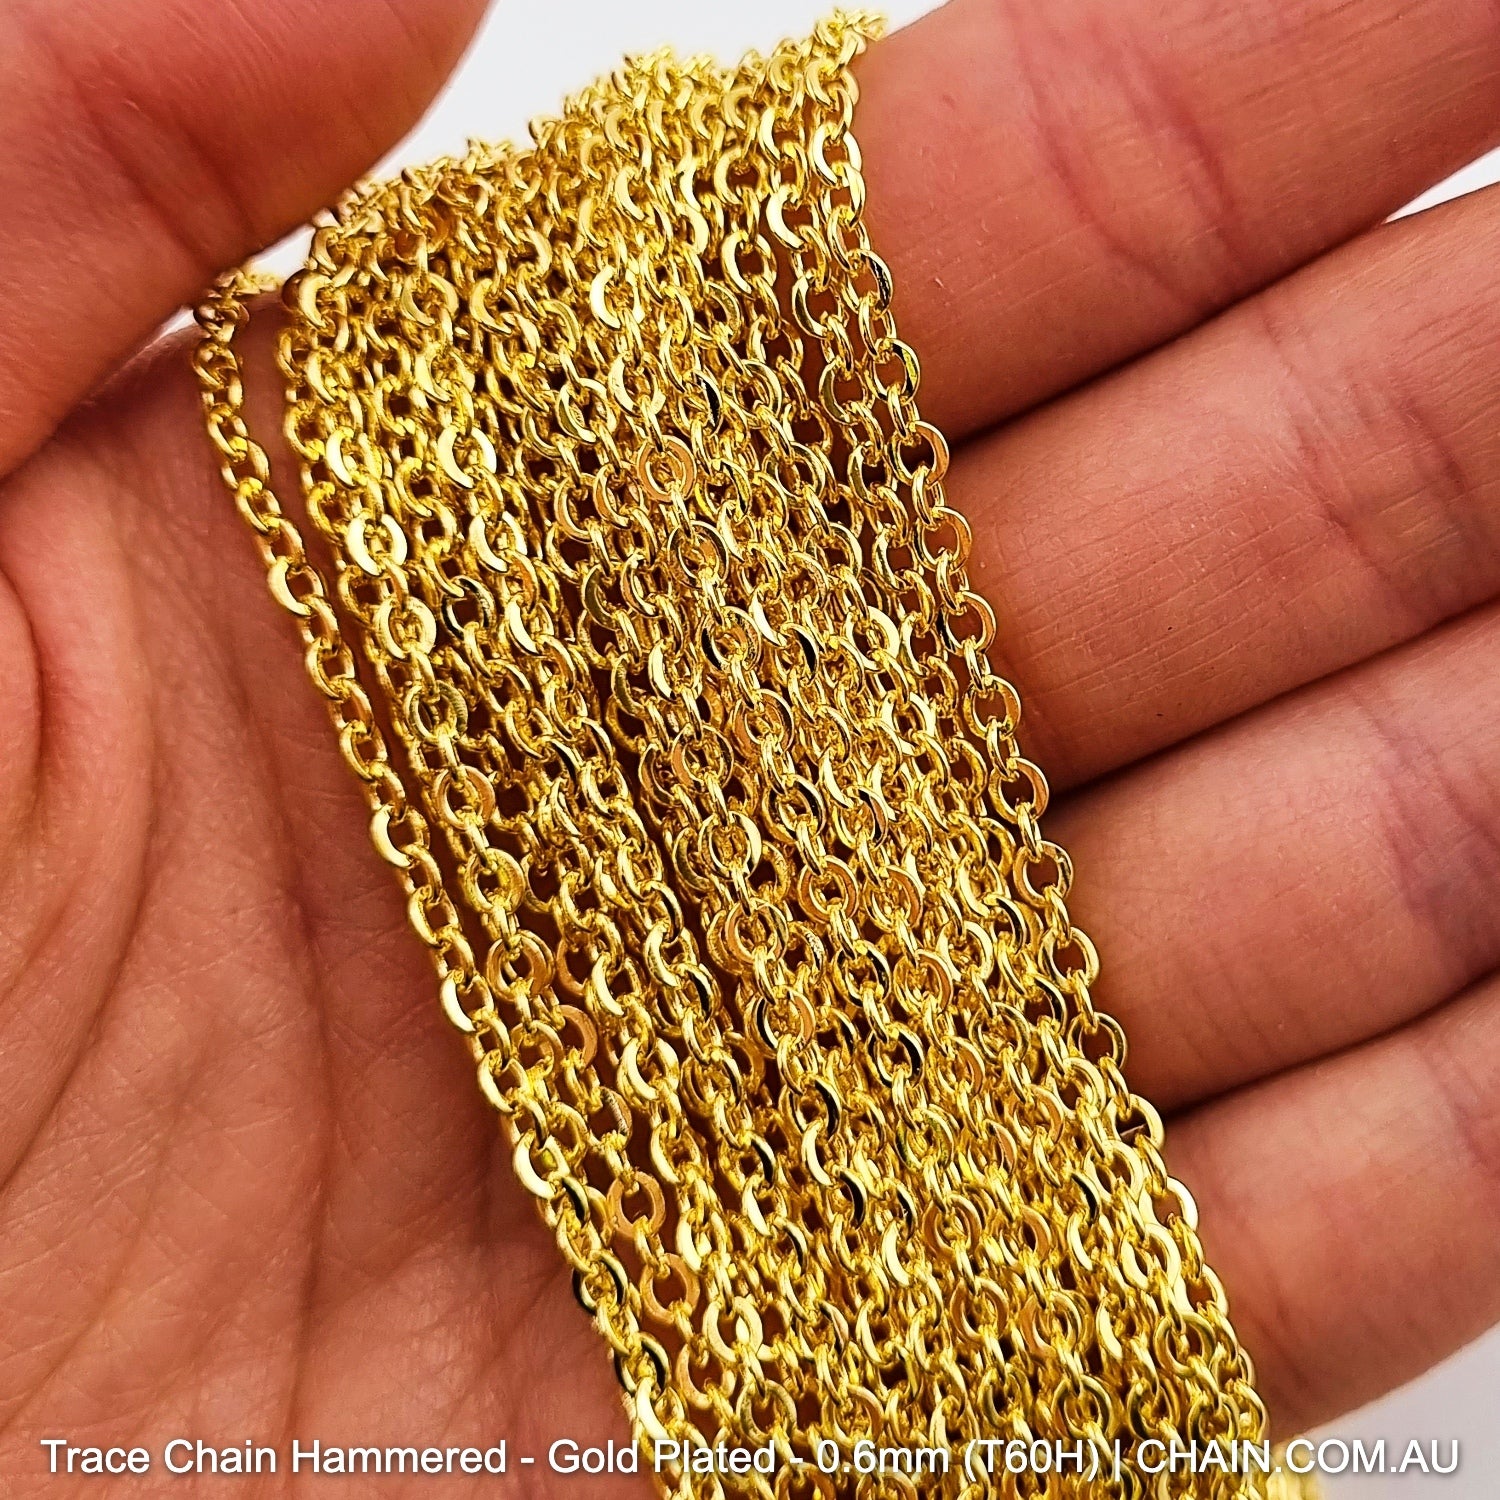 Hammered Trace Chain in a Gold Plated Finish. Size: 0.6mm, T60H. Jewellery Chain, Australia wide shipping. Shop chain.com.au